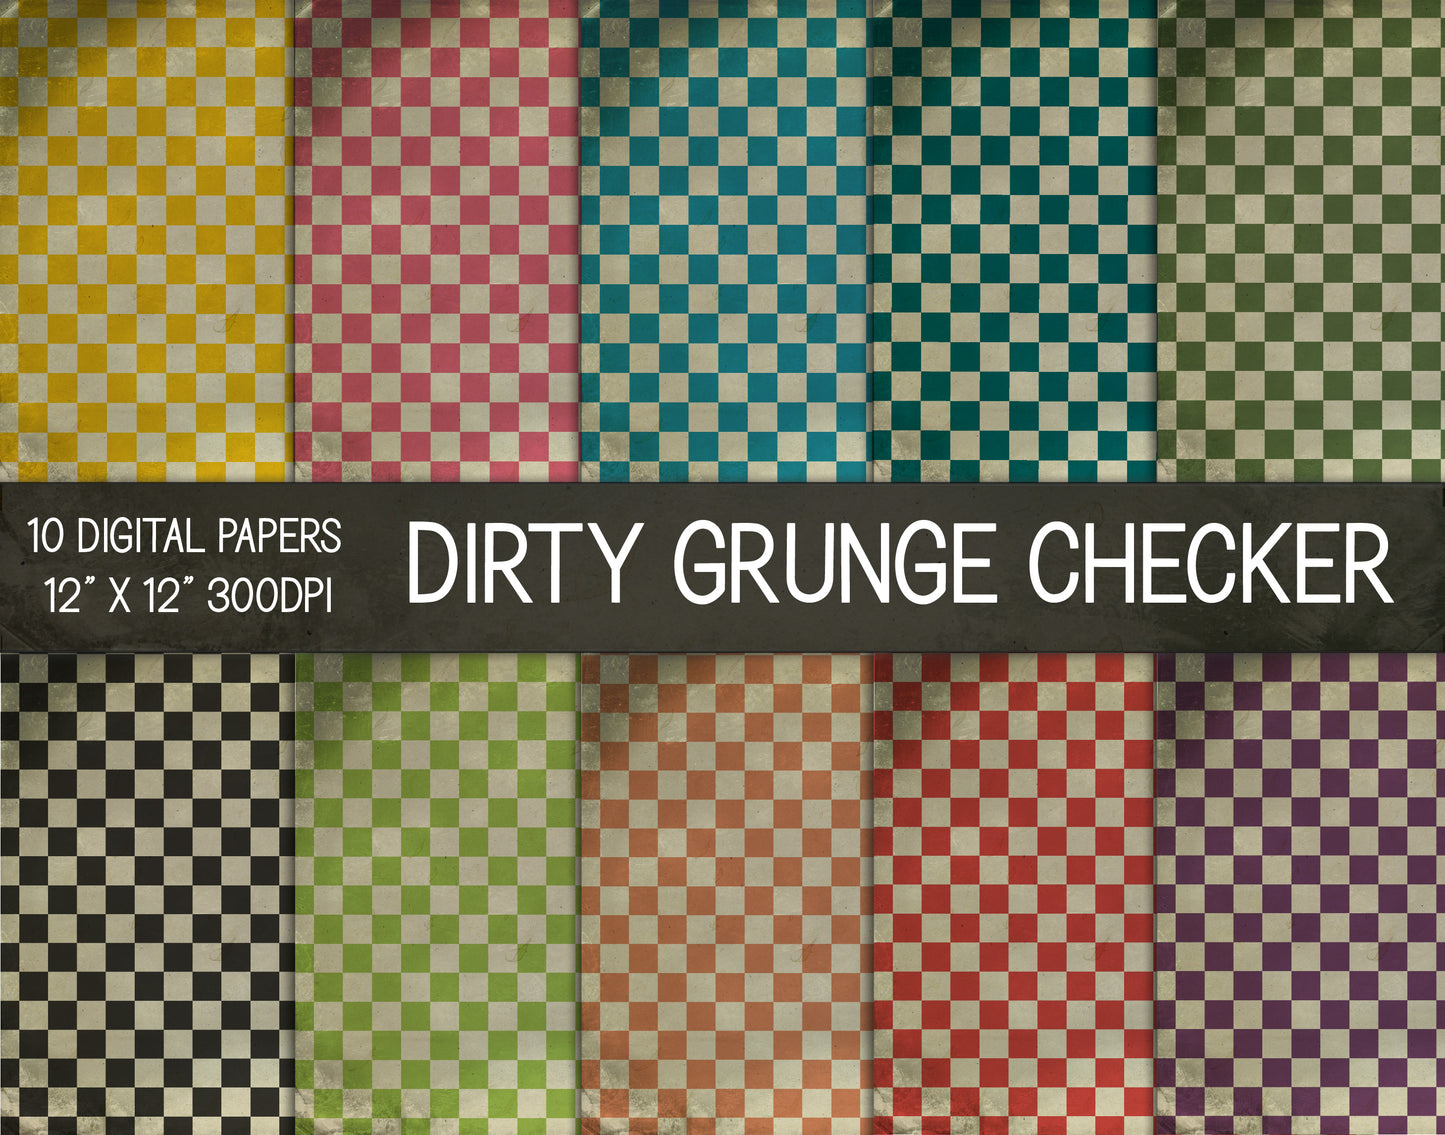 Dirty Grunge Checker Digital Papers, Grunge Texture Paper